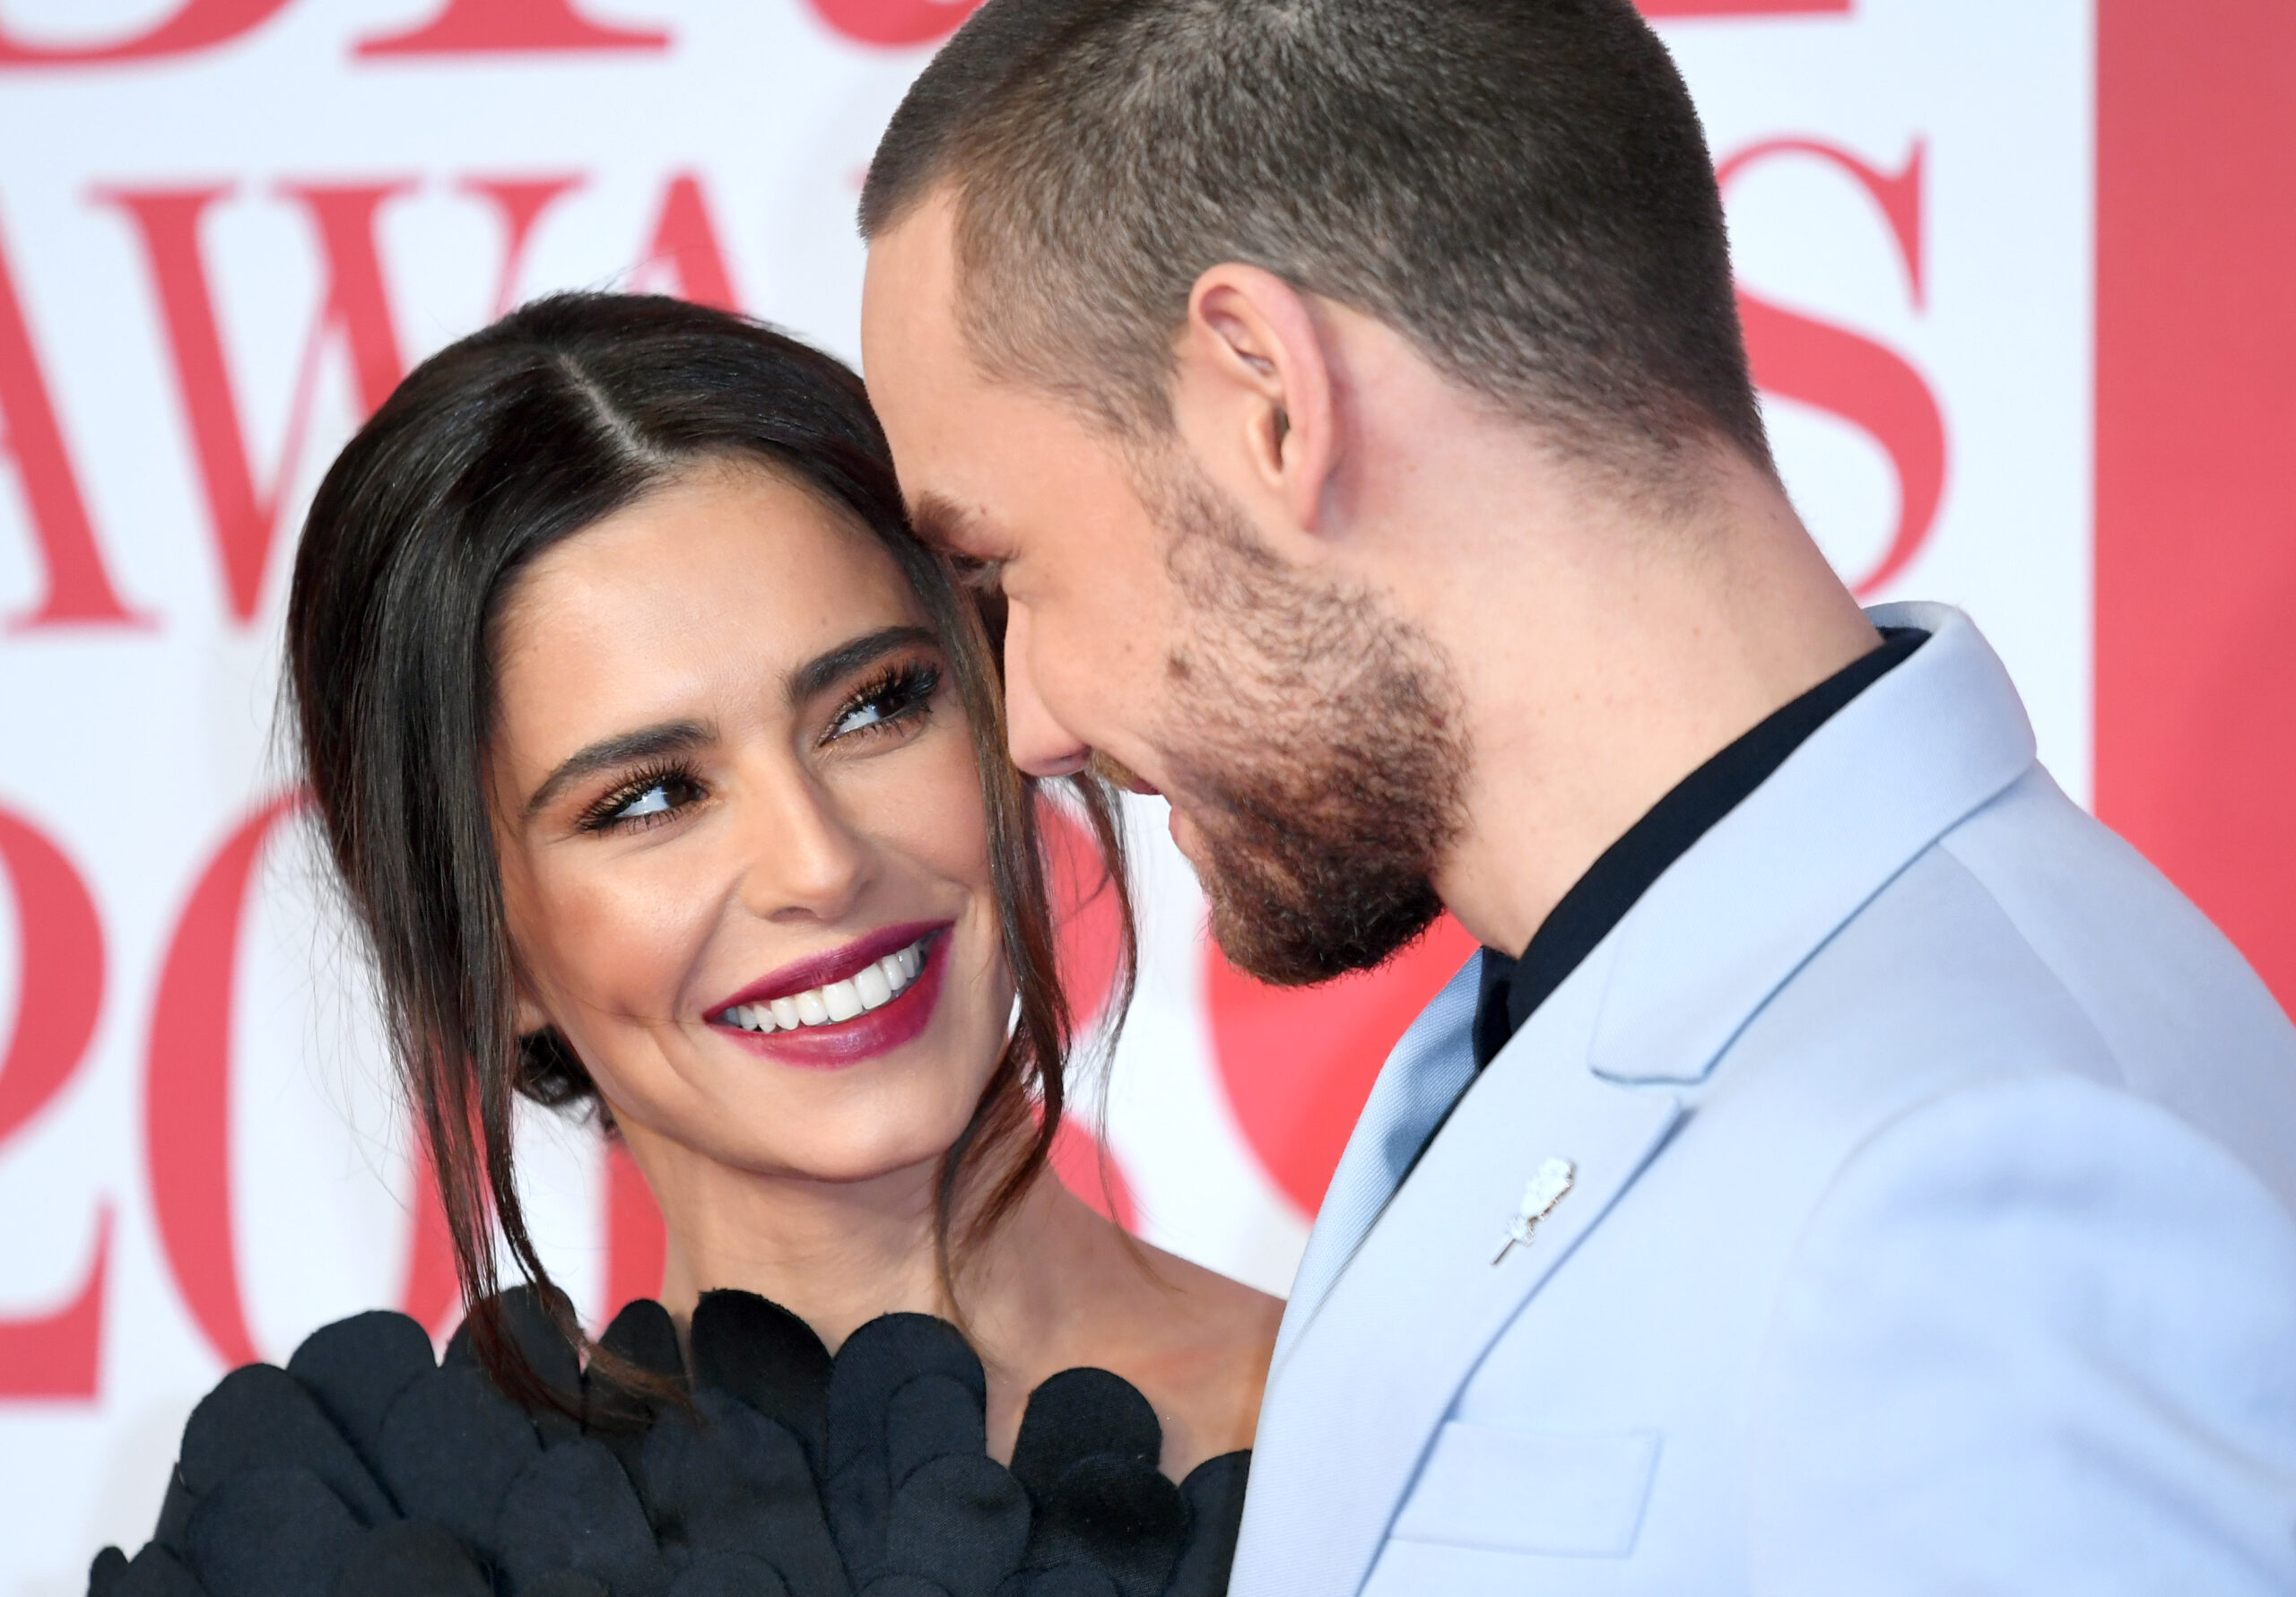 Cheryl defends Liam Payne in a Twitter rant